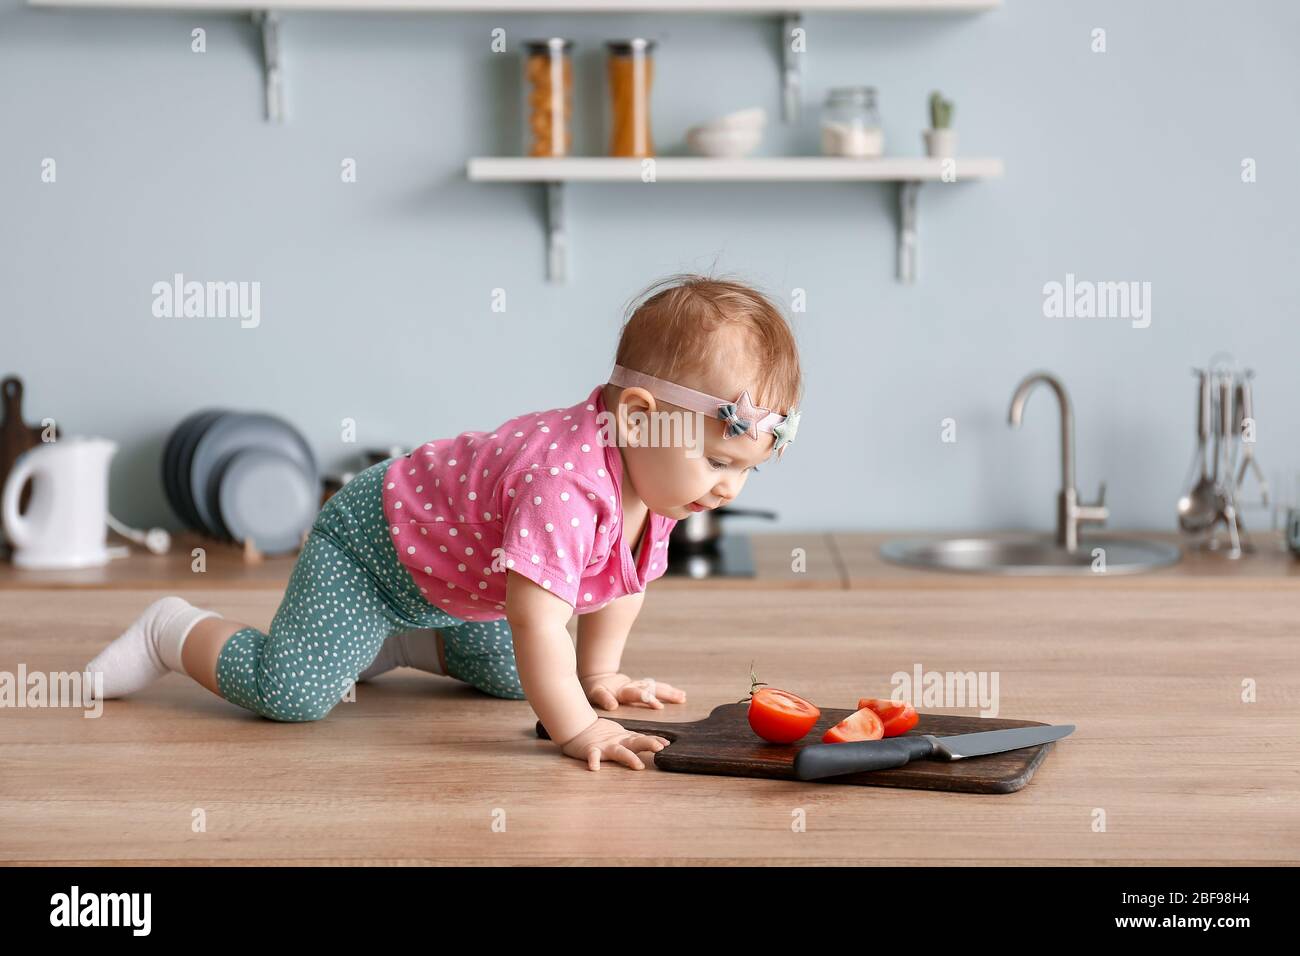 Child Little Boy Playing Dangerous Game With A Kitchen Knife Cut